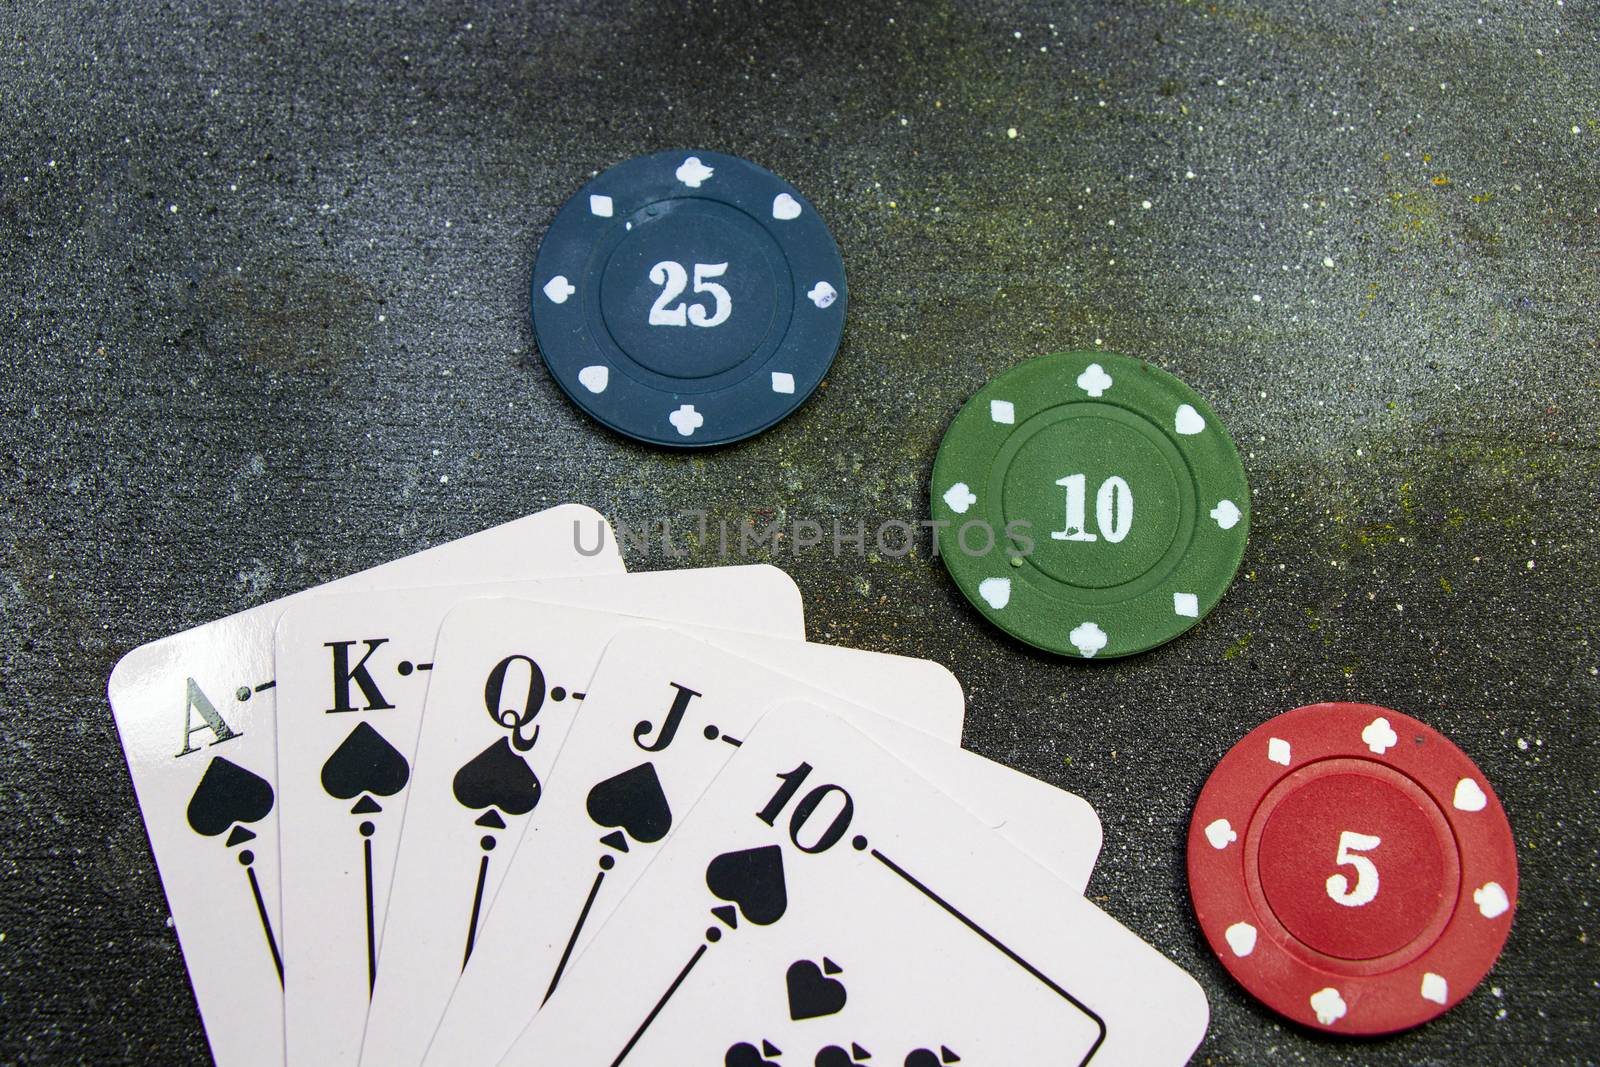 Royal flush poker and blackjack cards and chips by Taidundua